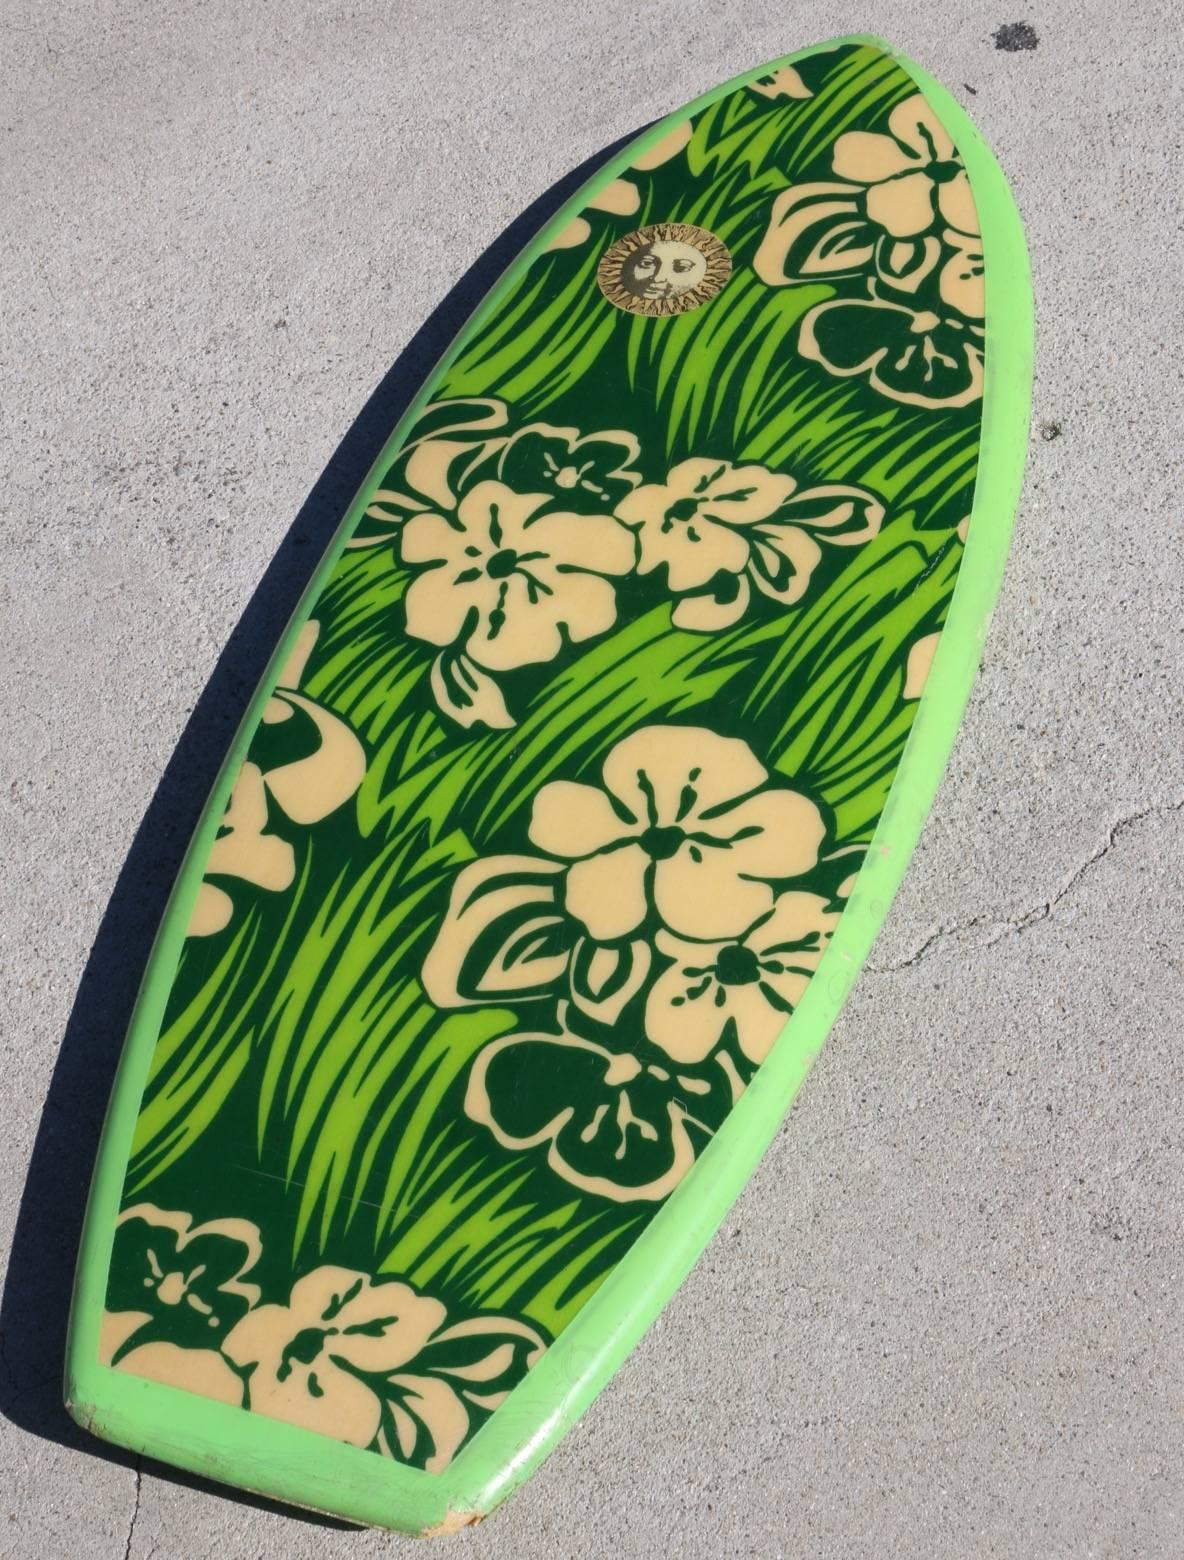 Vibrant Green Floral Dextra Bellyboard Surfboard, circa 1965 For Sale 2